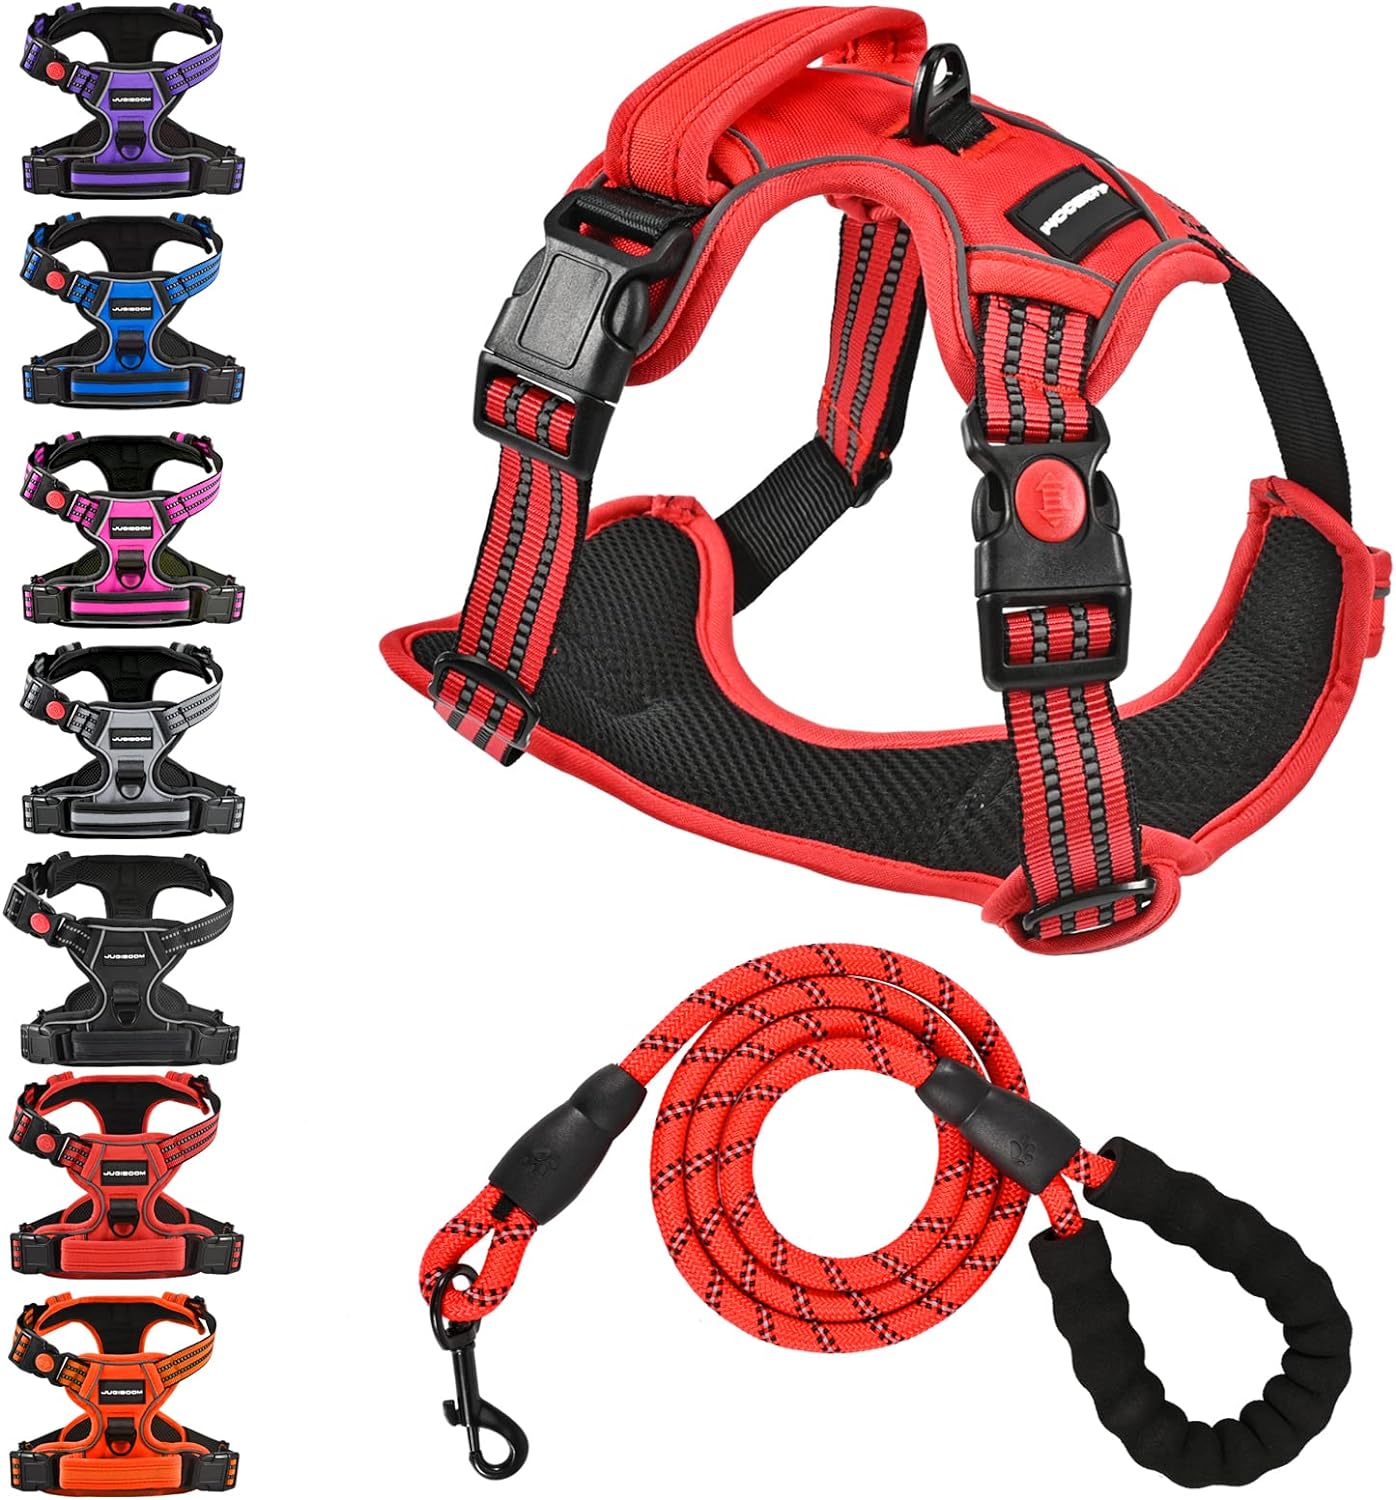 Juqiboom No Pull Dog Harness with A Free Heavy Duty 5ft Dog Leash, Adjustable Soft Padded Dog Vest, Reflective No-Choke Pet Oxford Vest with Easy Control Handle for Small and Large Dogs(Red, X-Large)